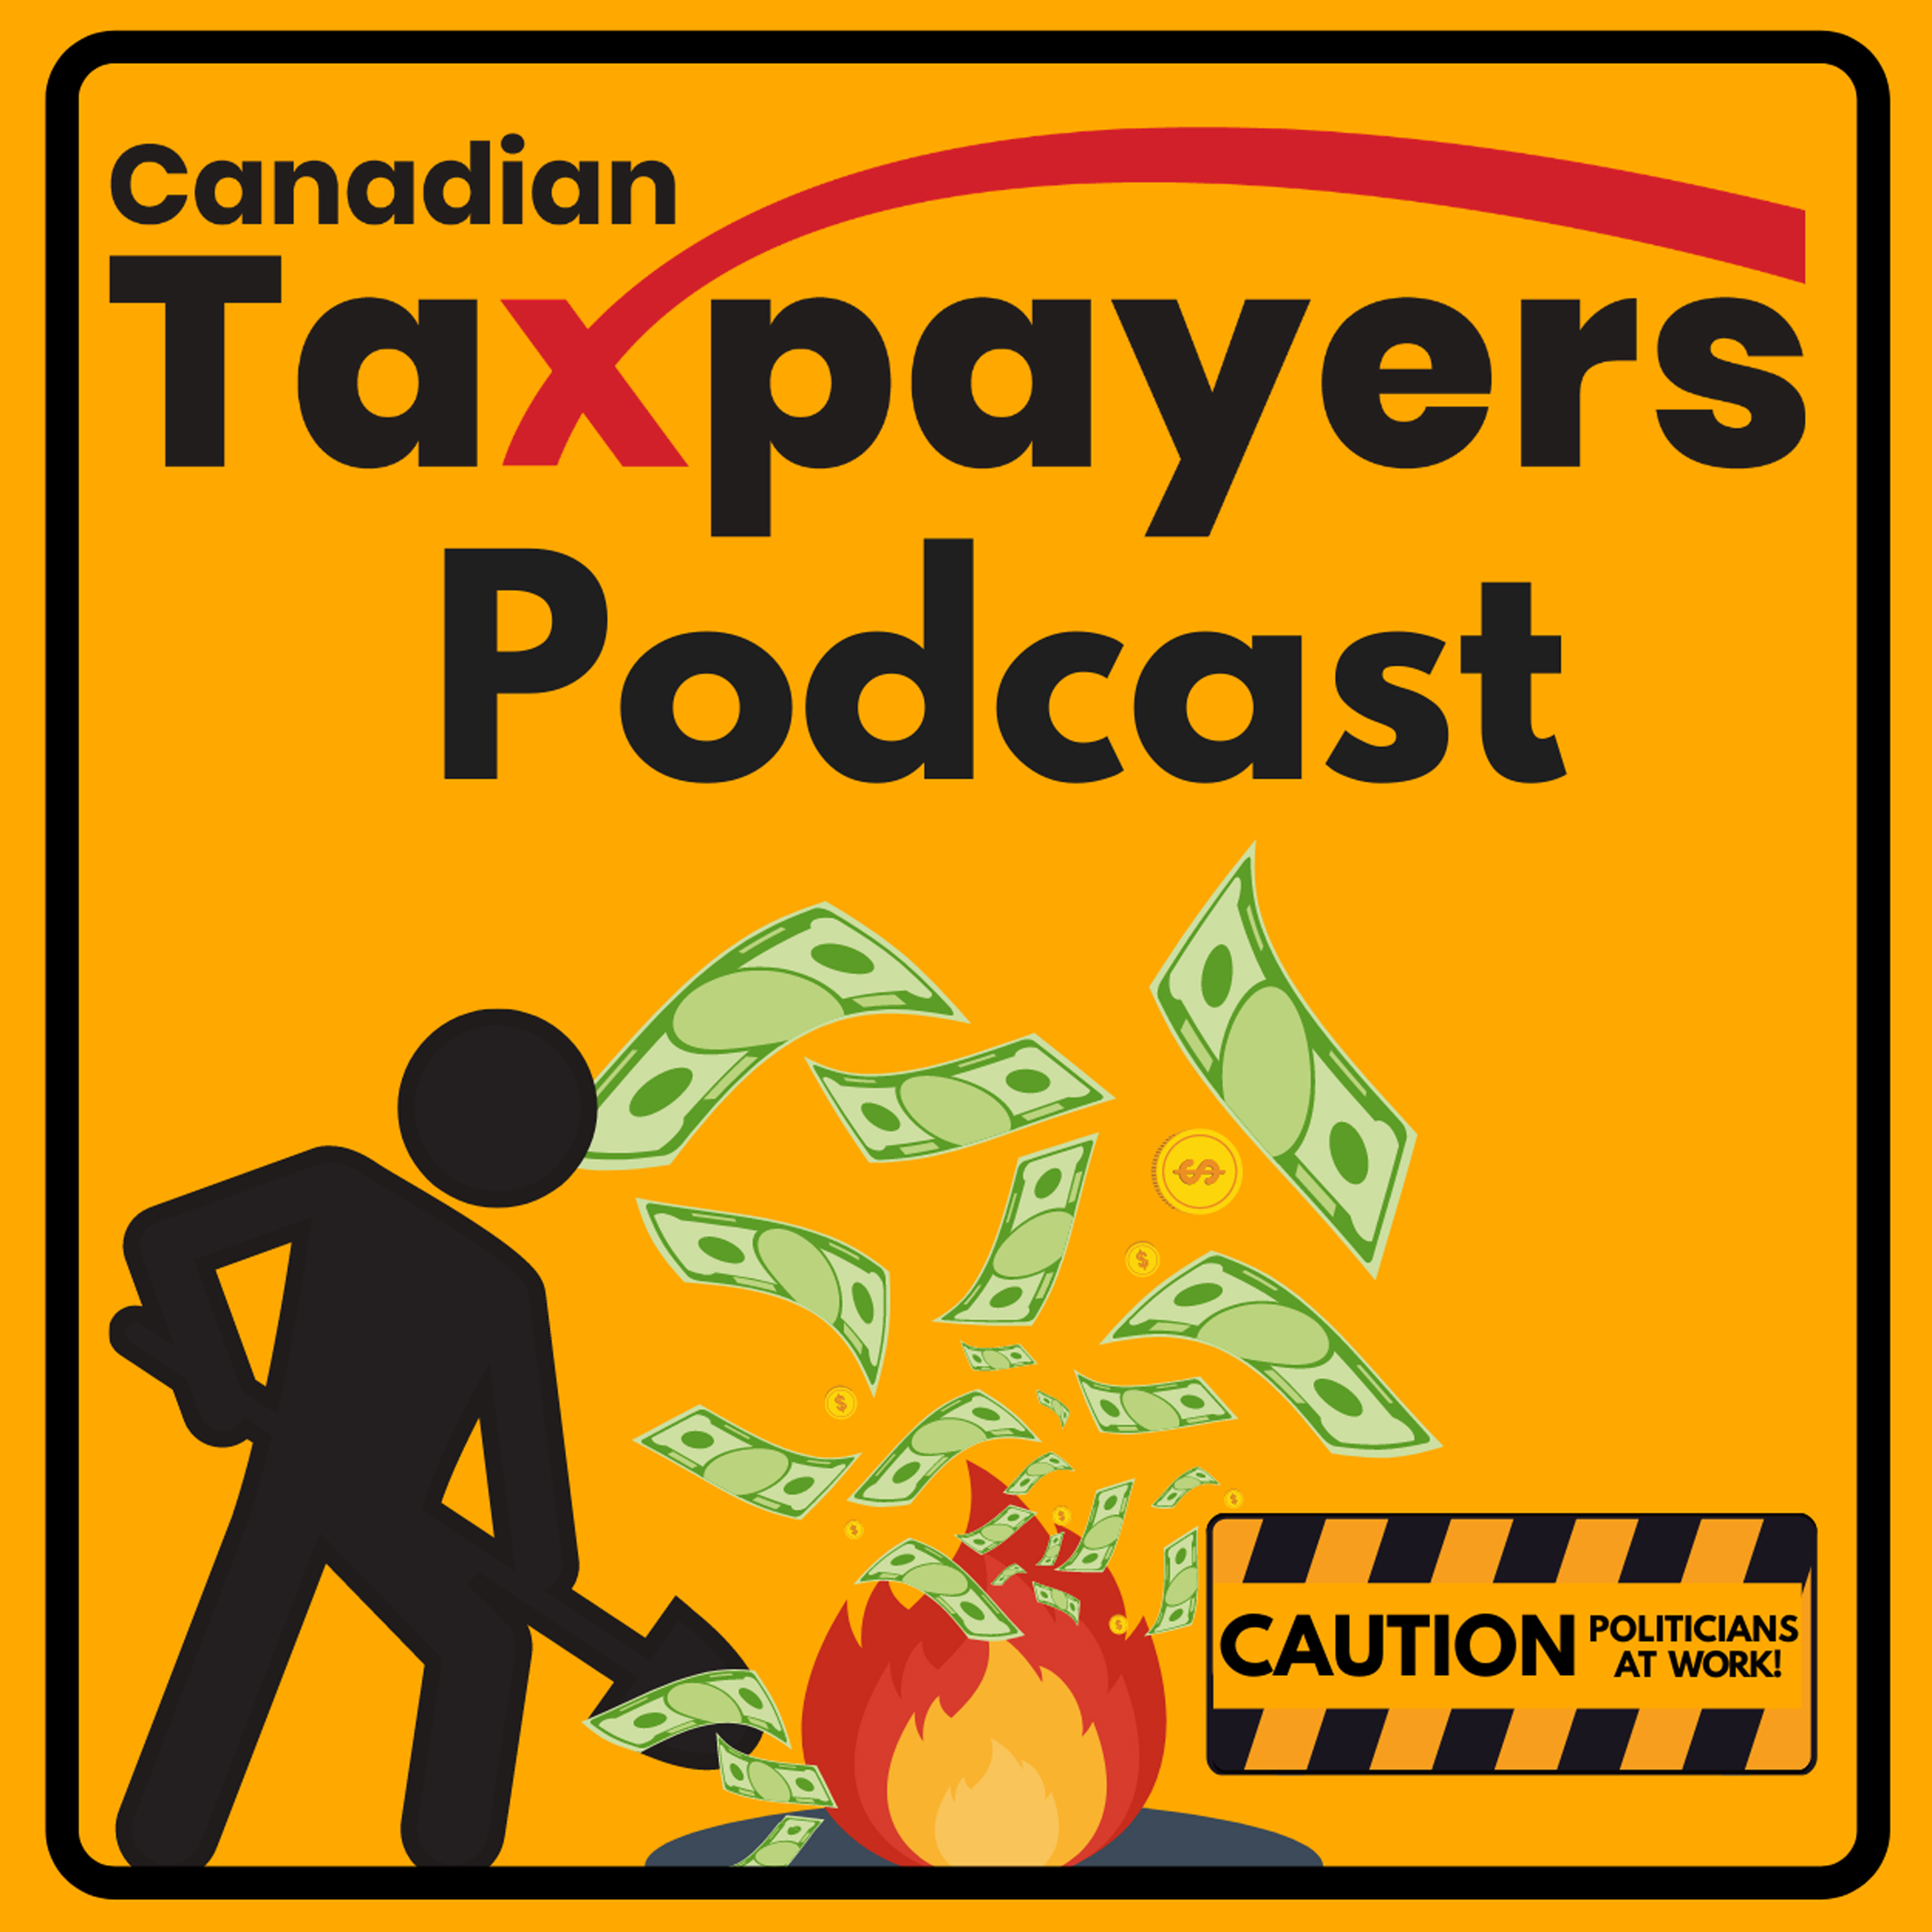 #46 Trudeau Raising Taxes (Again), Canada Fails on Transparency, and Ontario Health Executives Get Big Payouts 